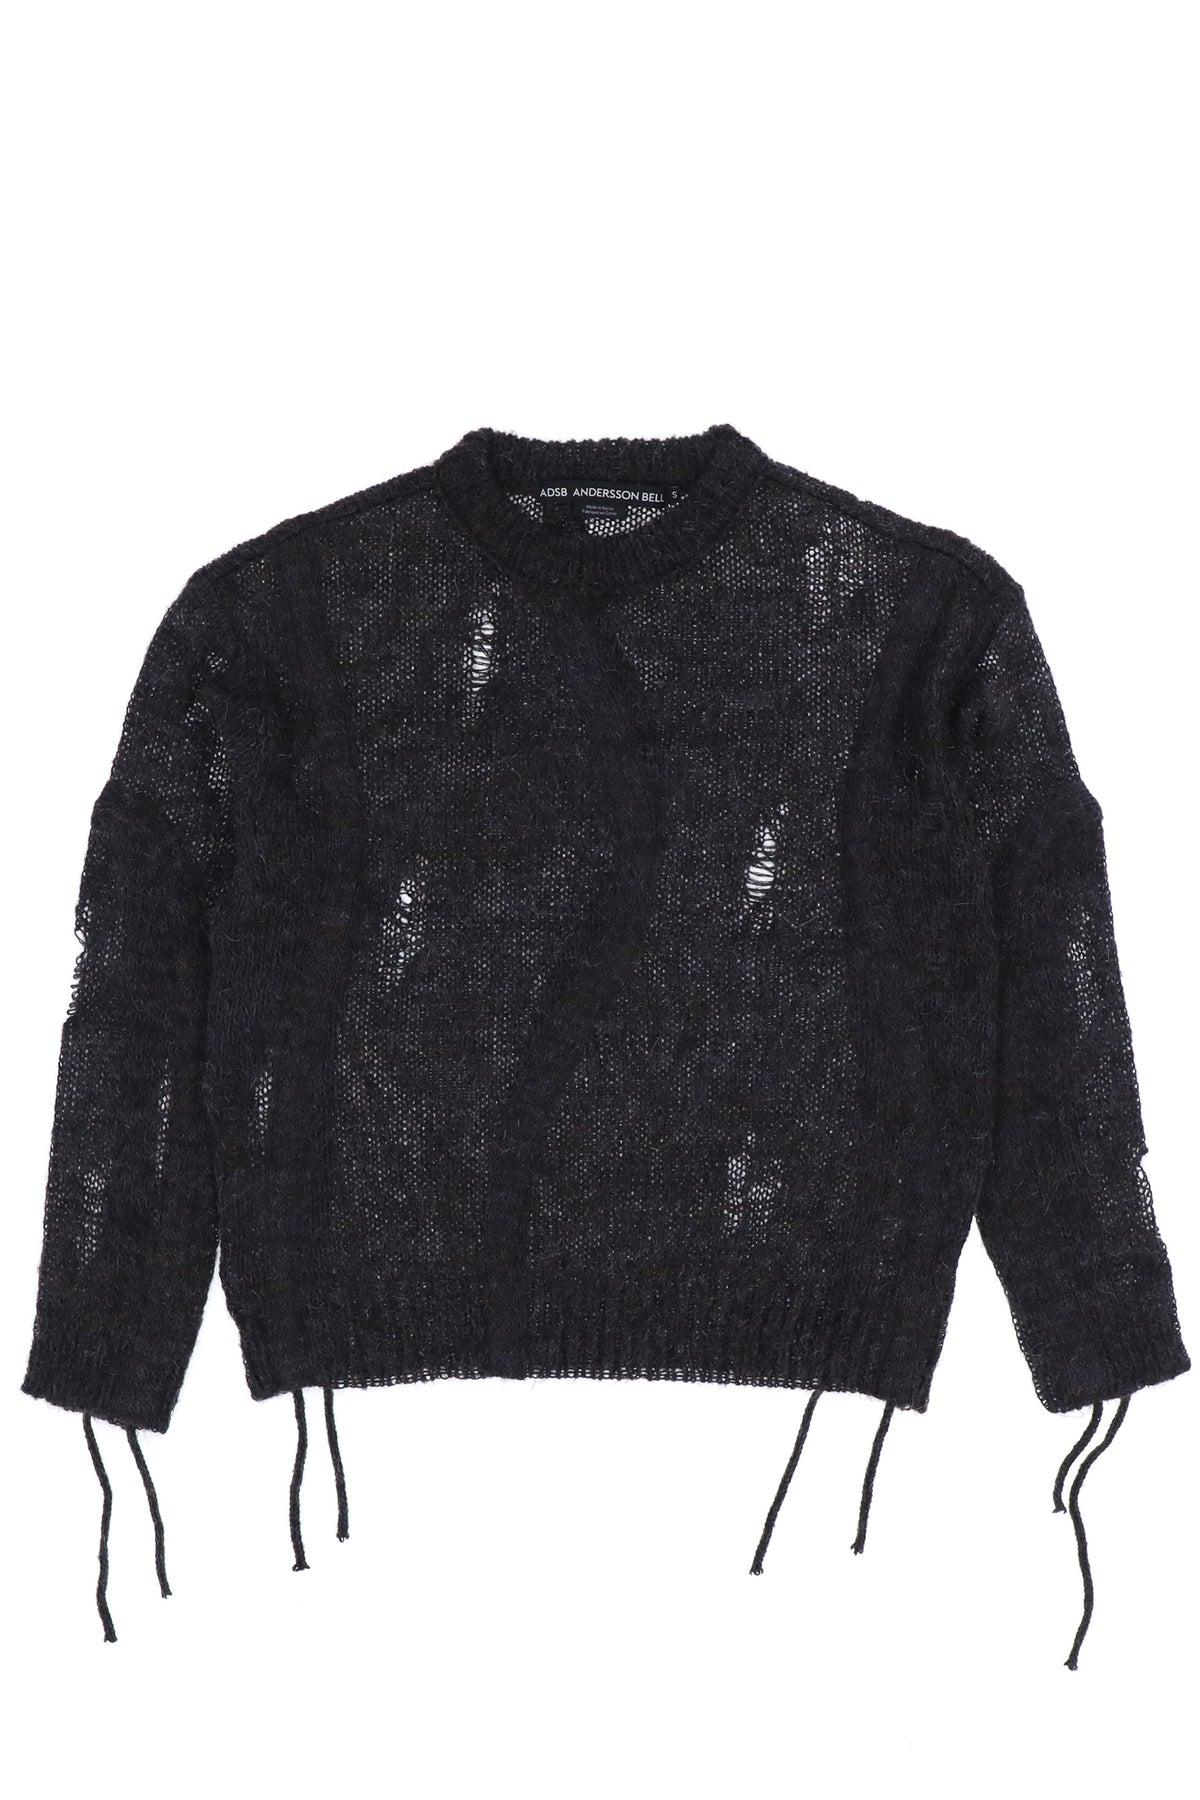 Andersson Bell COLBINE CREWNECK SWEATER / CHARCOAL